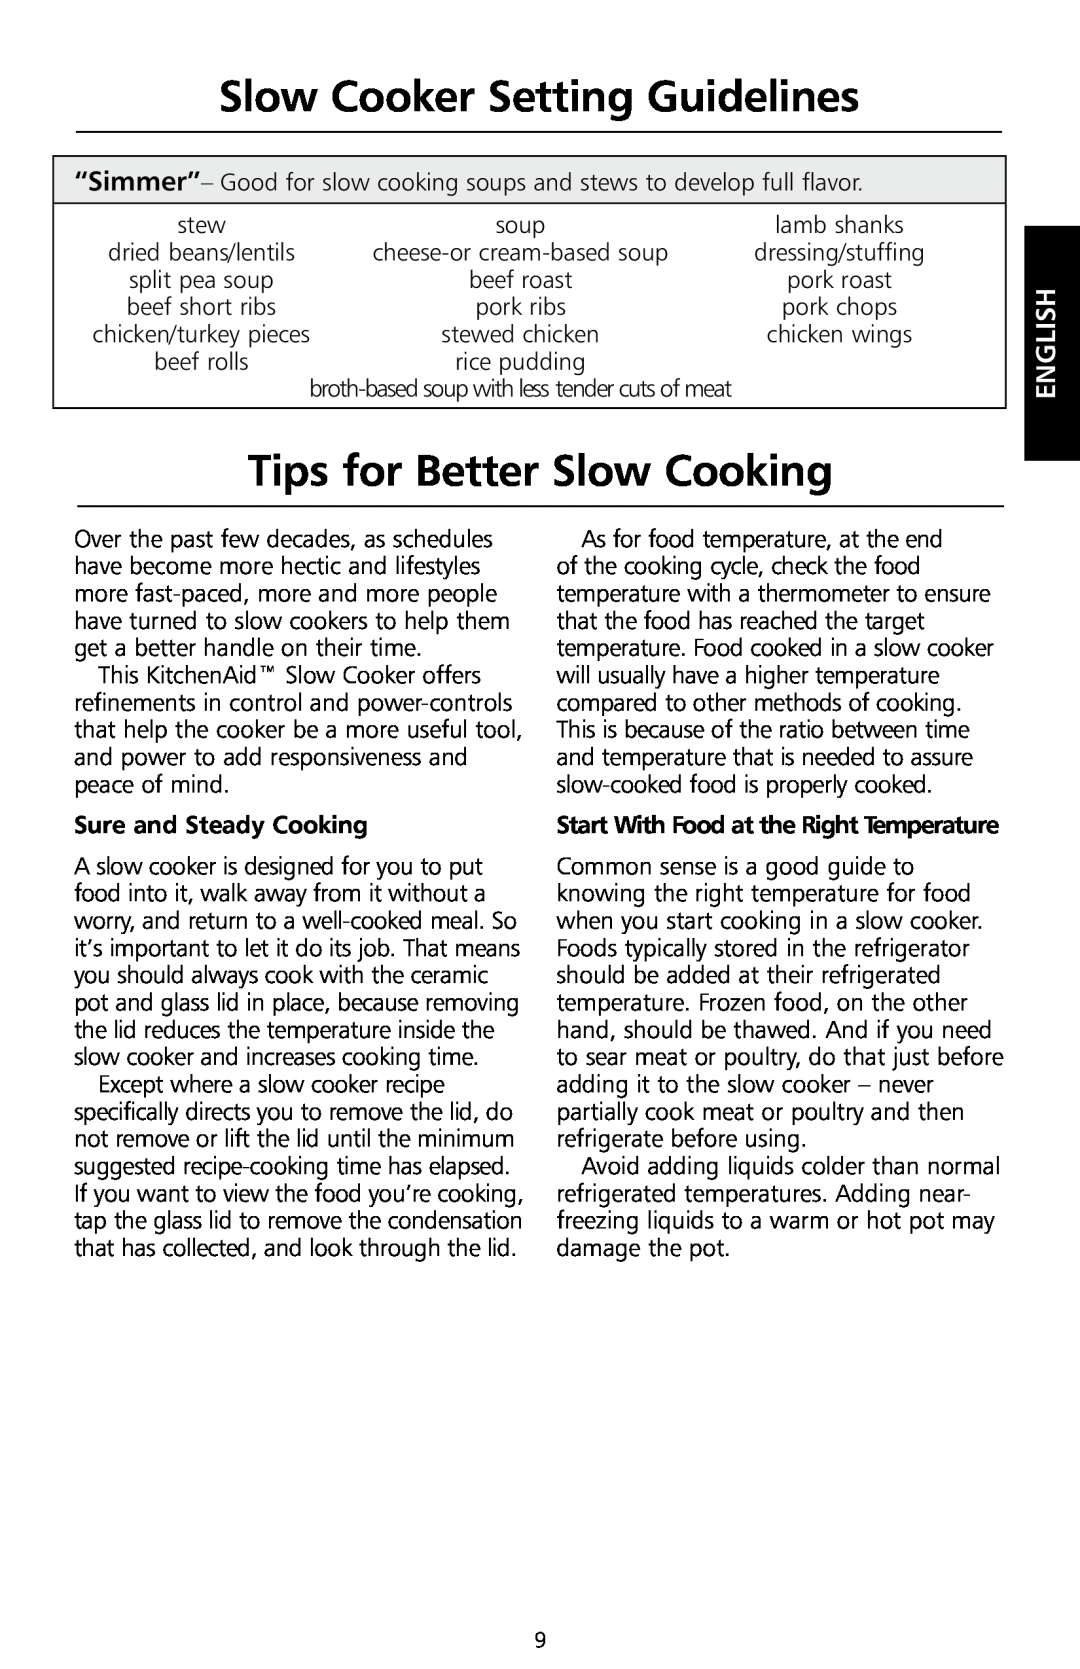 KitchenAid KSC700 Tips for Better Slow Cooking, Sure and Steady Cooking, Start With Food at the Right Temperature, English 